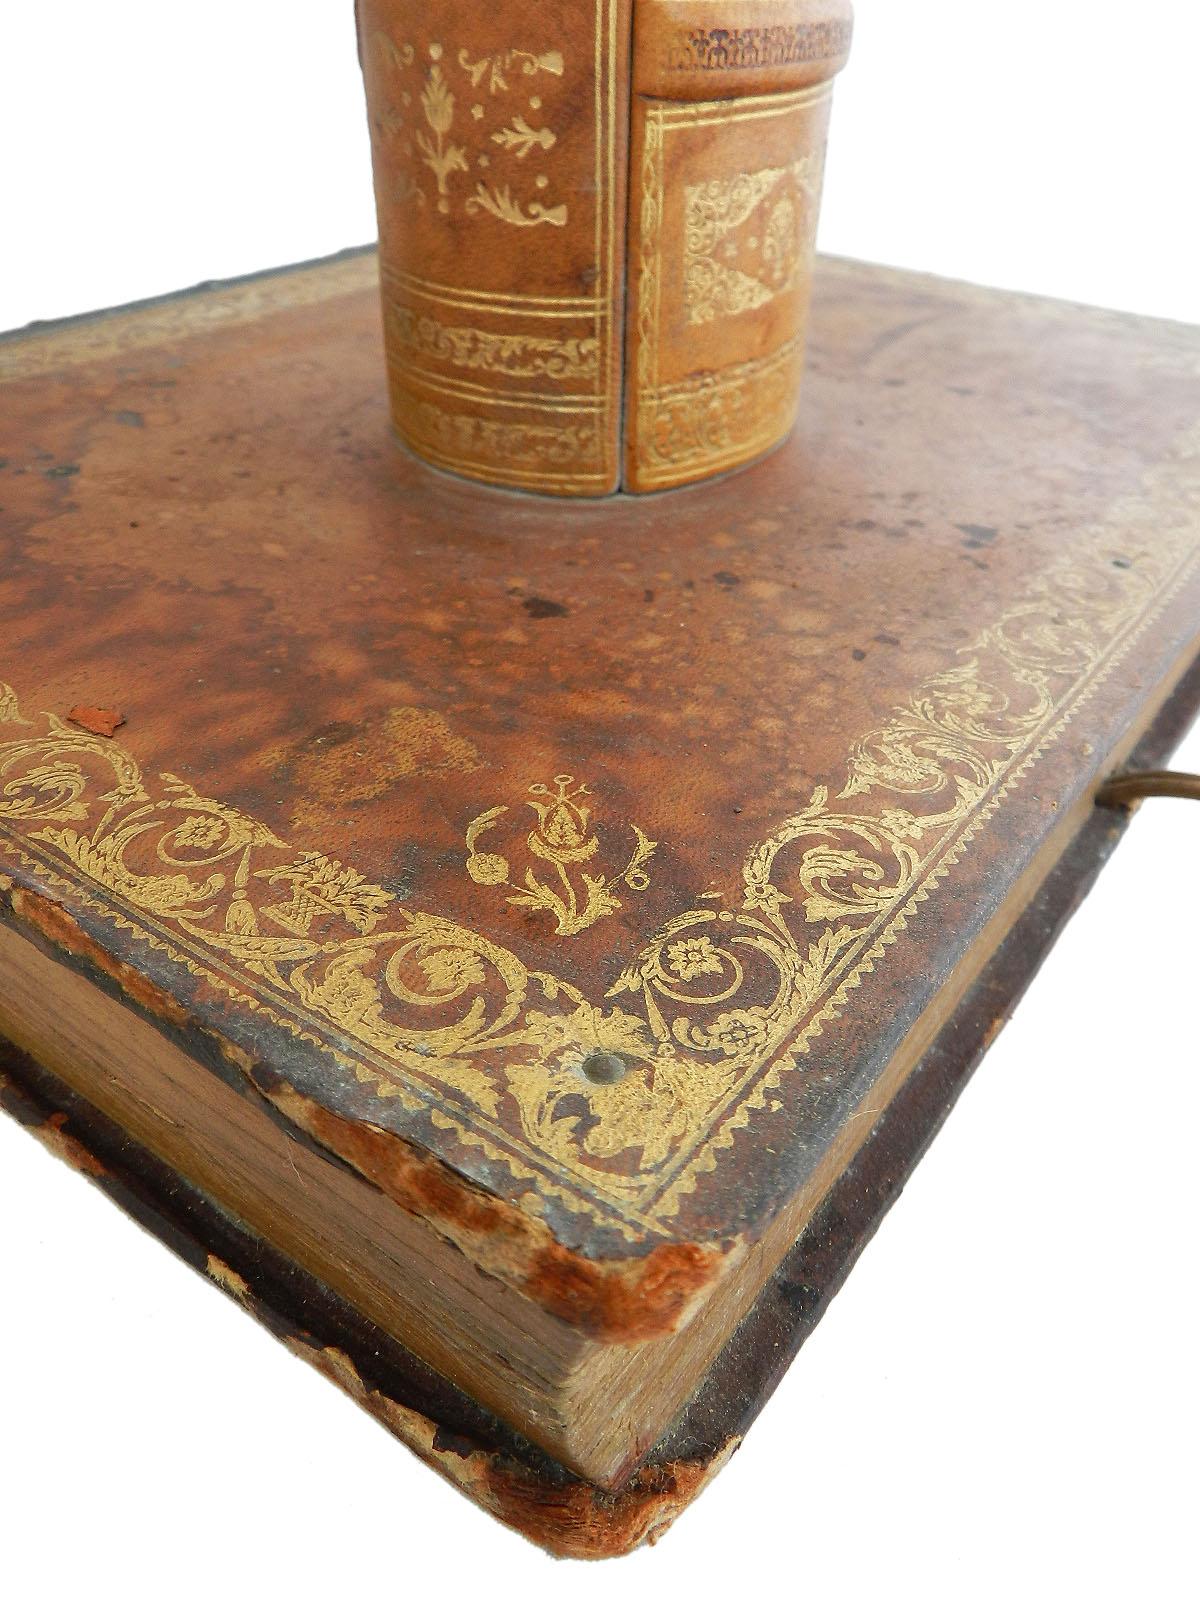 Belle Époque Book Table Lamp Leather Bound, Early 20th Century